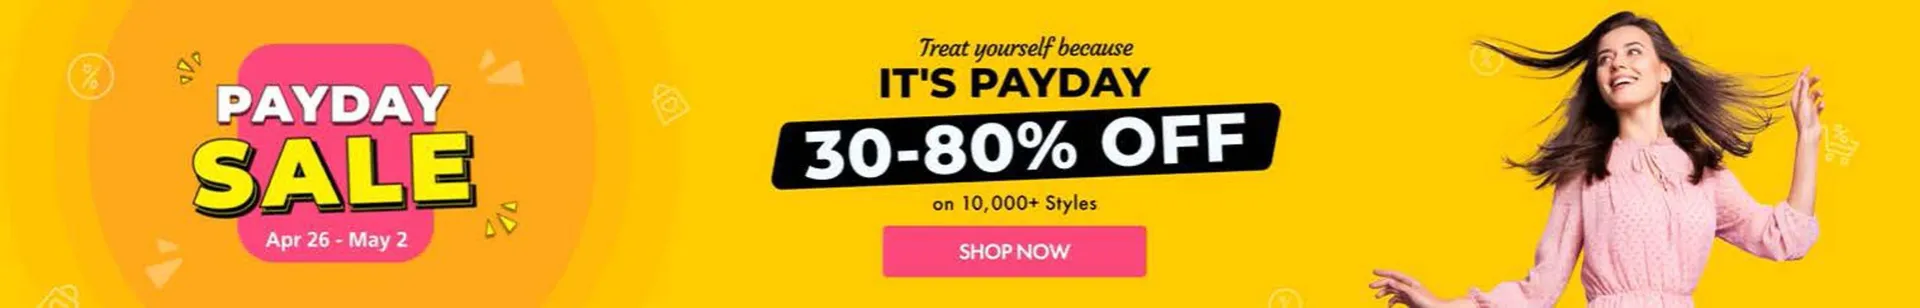 Its Payday! 30-80% Off - 1